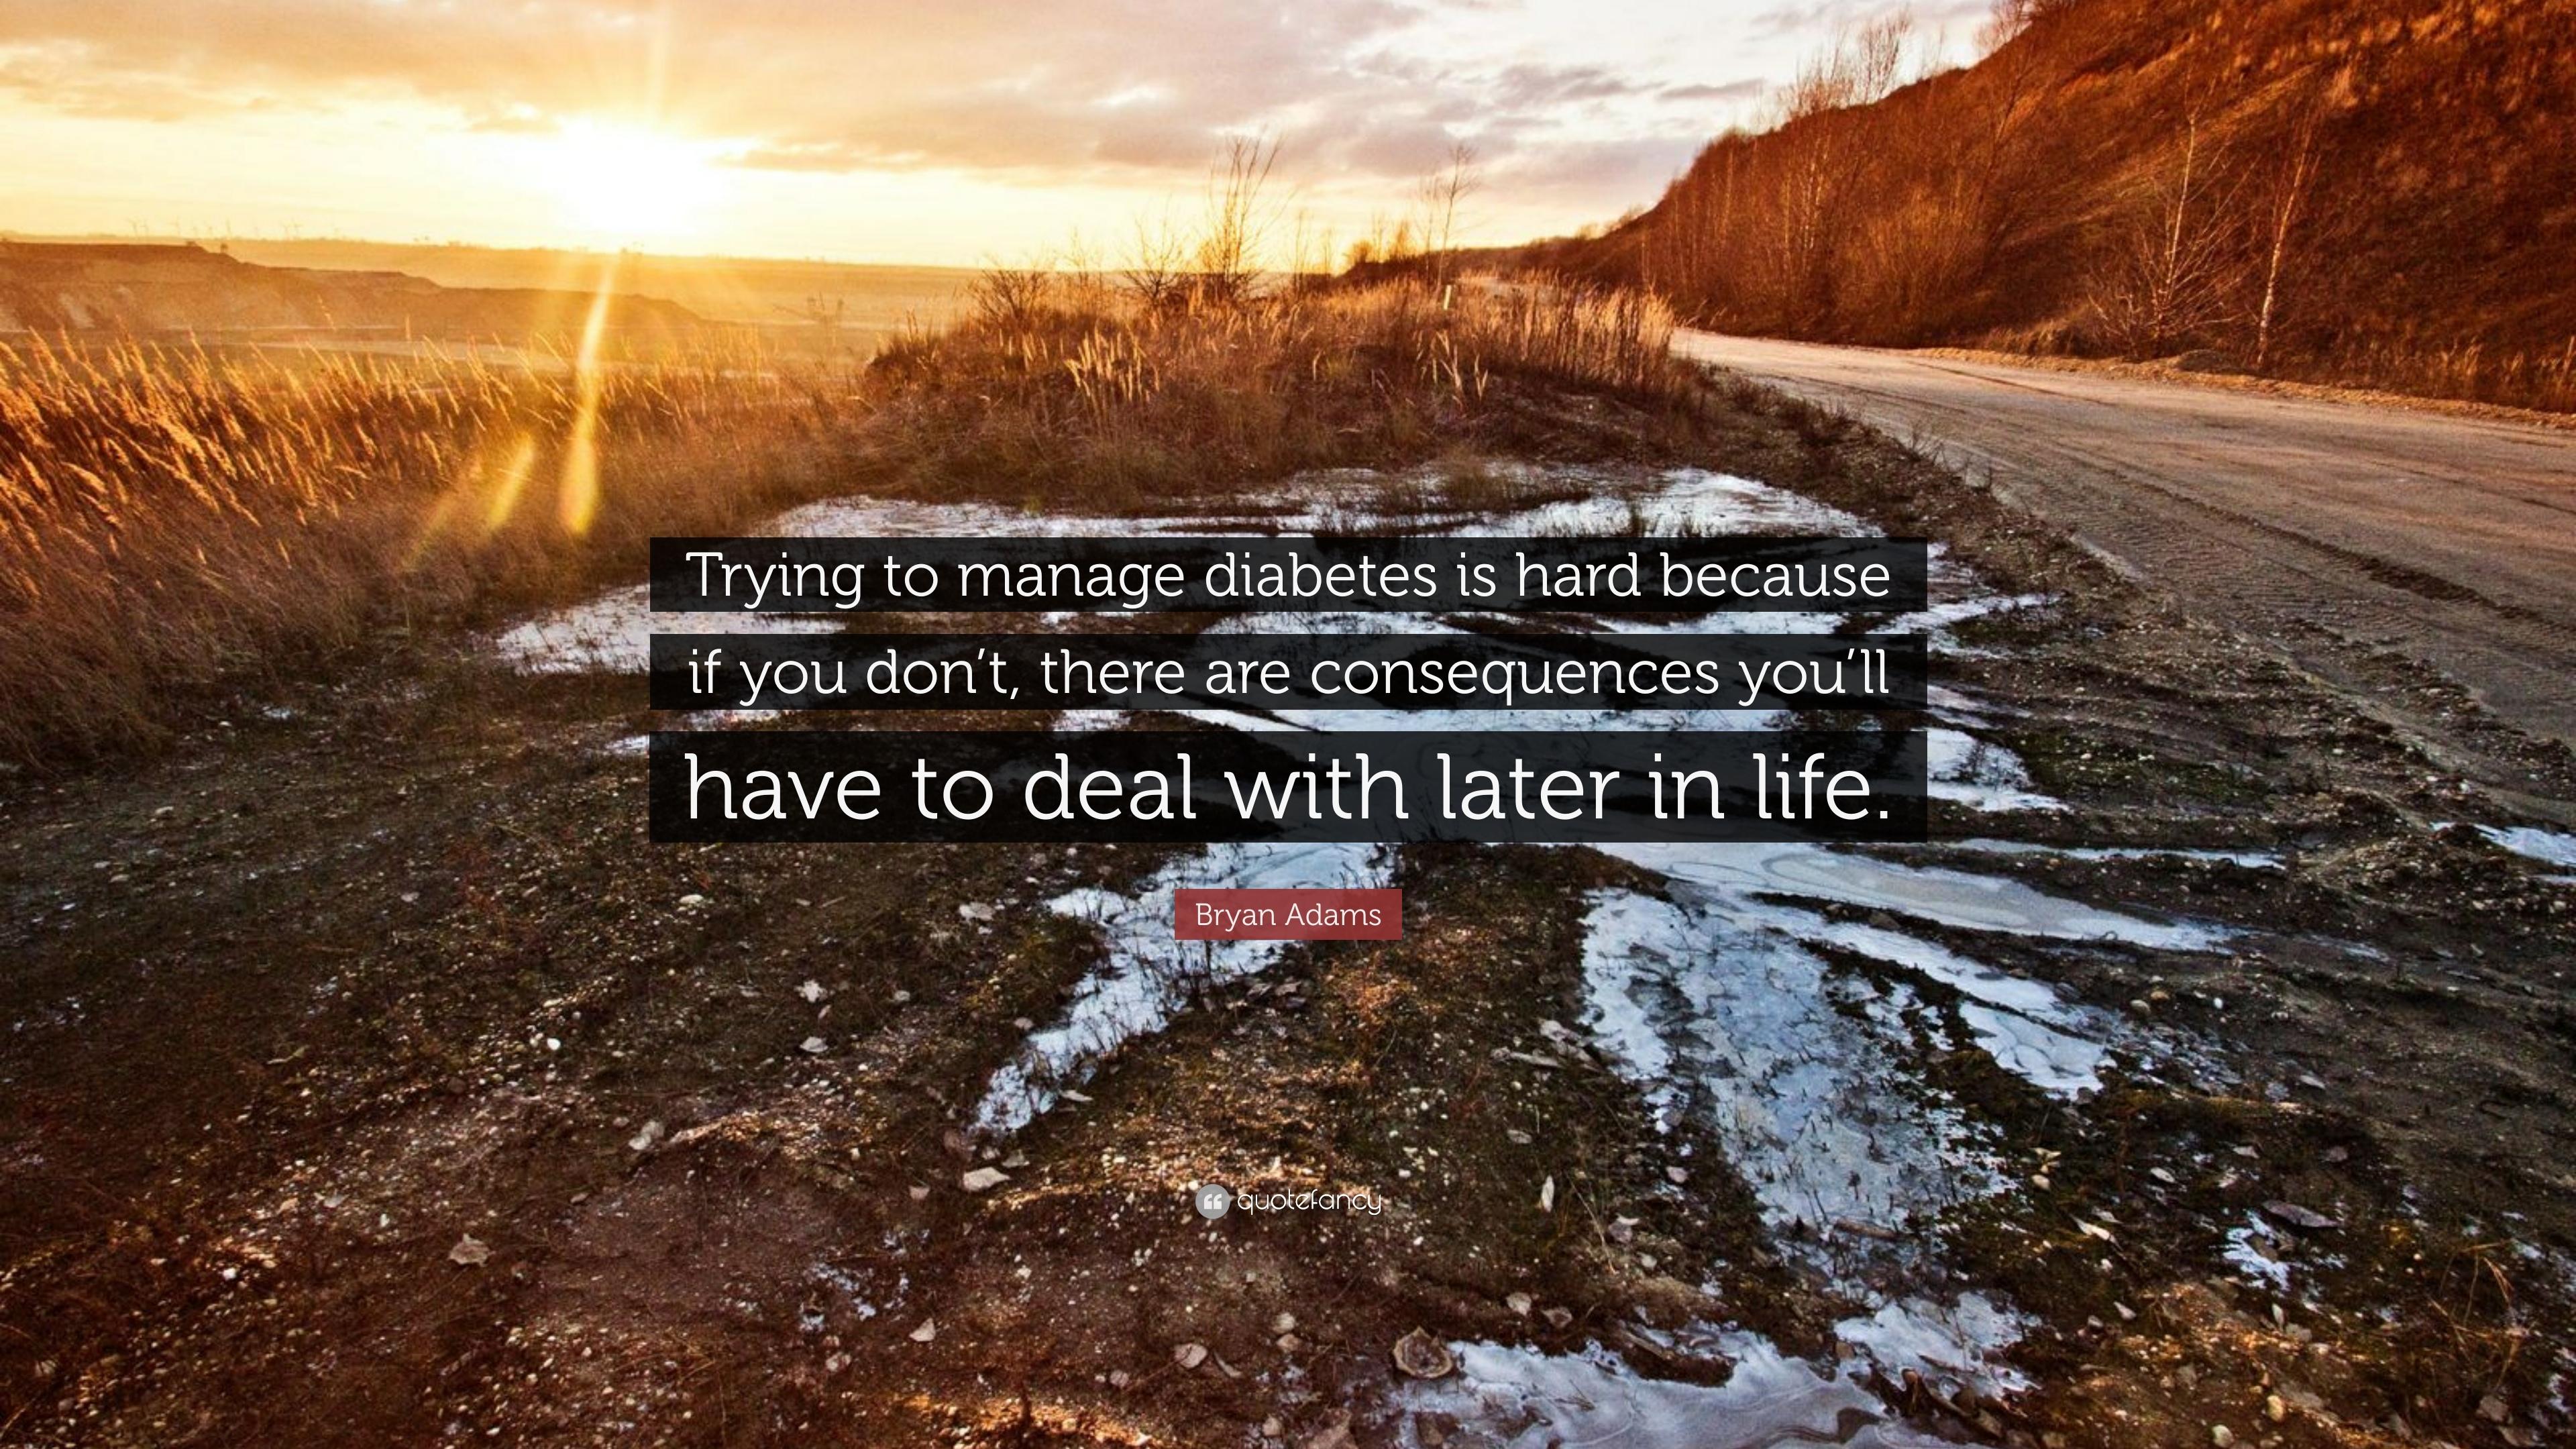 Bryan Adams Quote: “Trying to manage diabetes is hard because if you